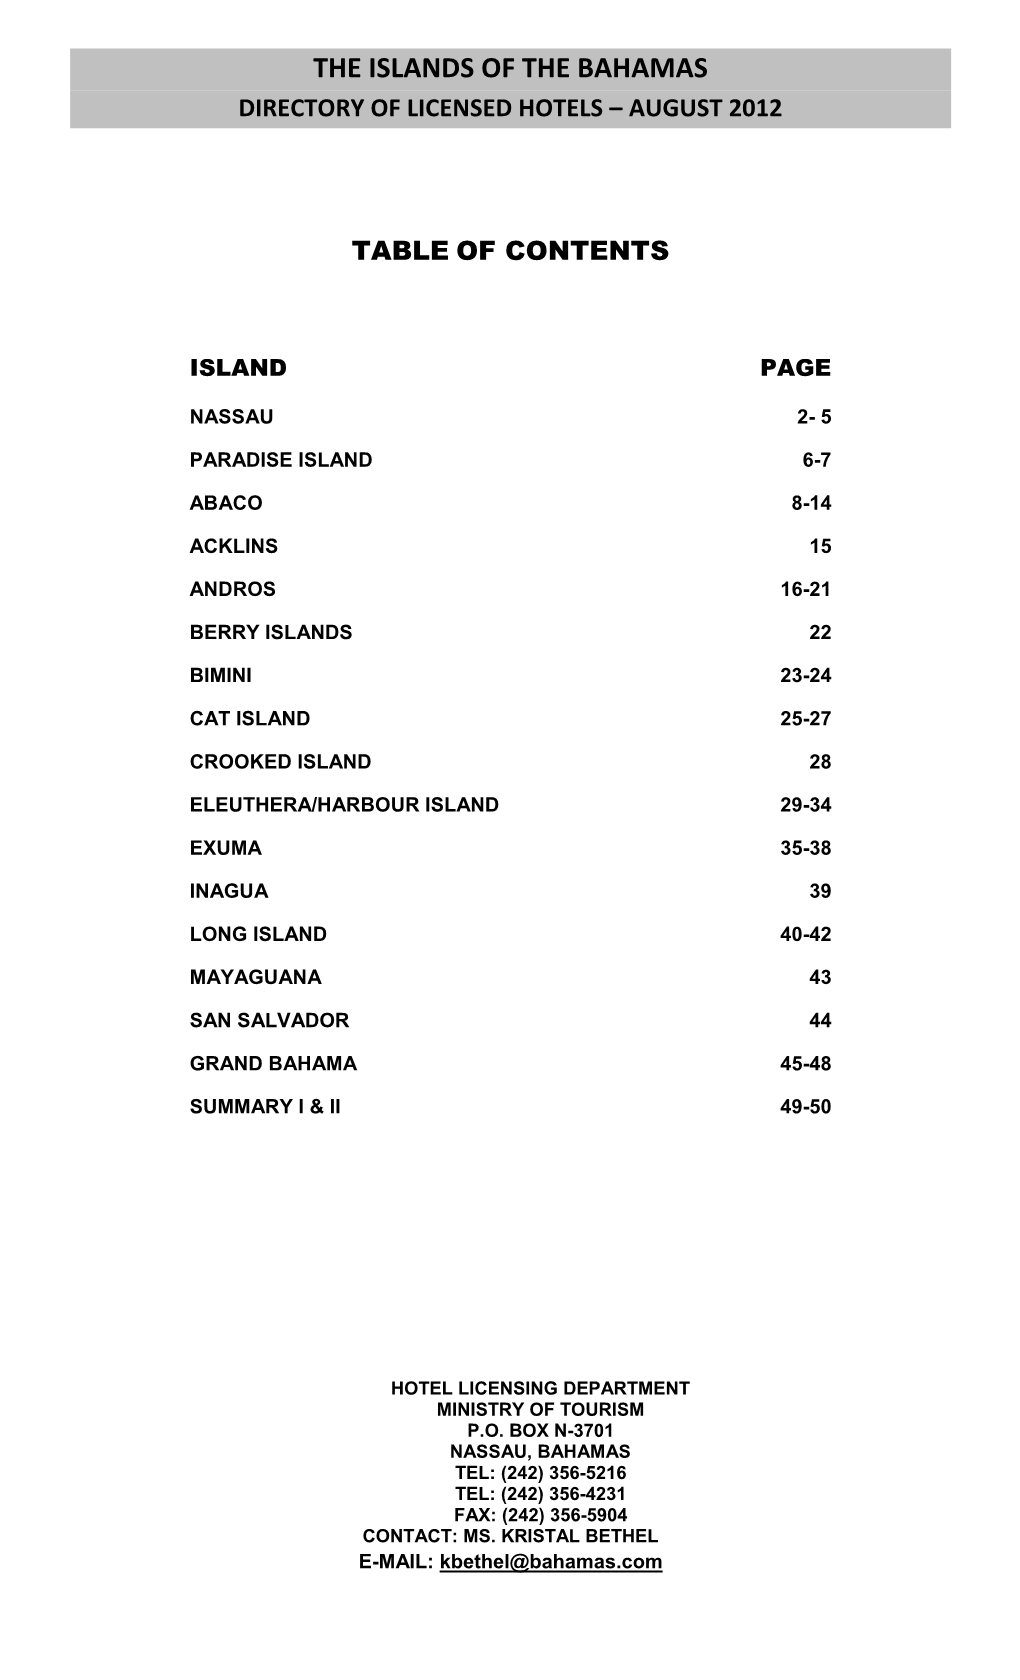 The Islands of the Bahamas Directory of Licensed Hotels – August 2012